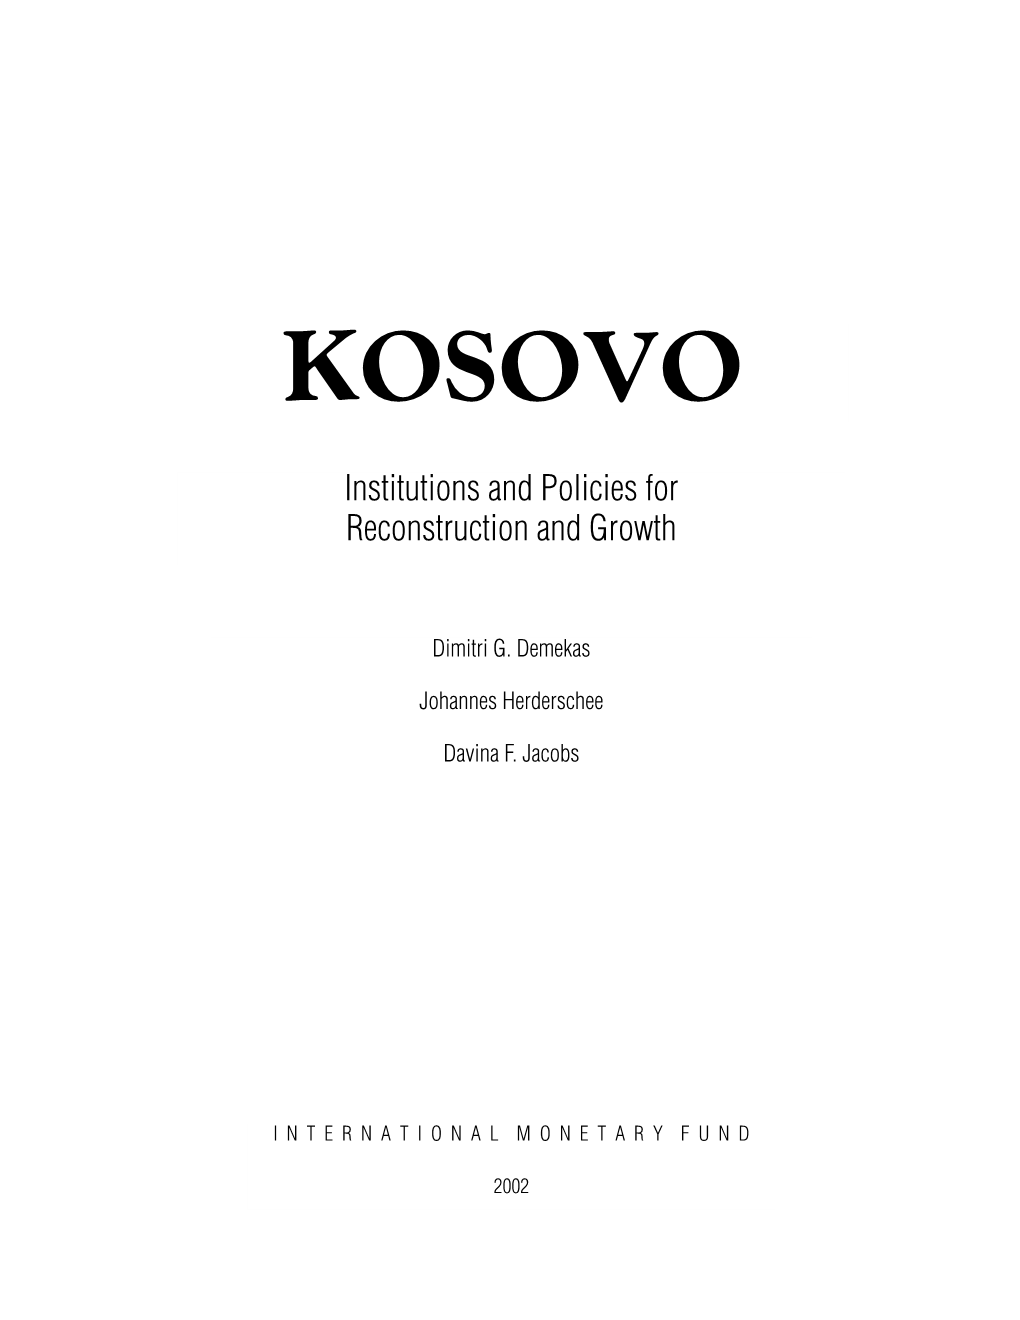 Kosovo: Institutions and Policies for Reconstruction and Growth, April